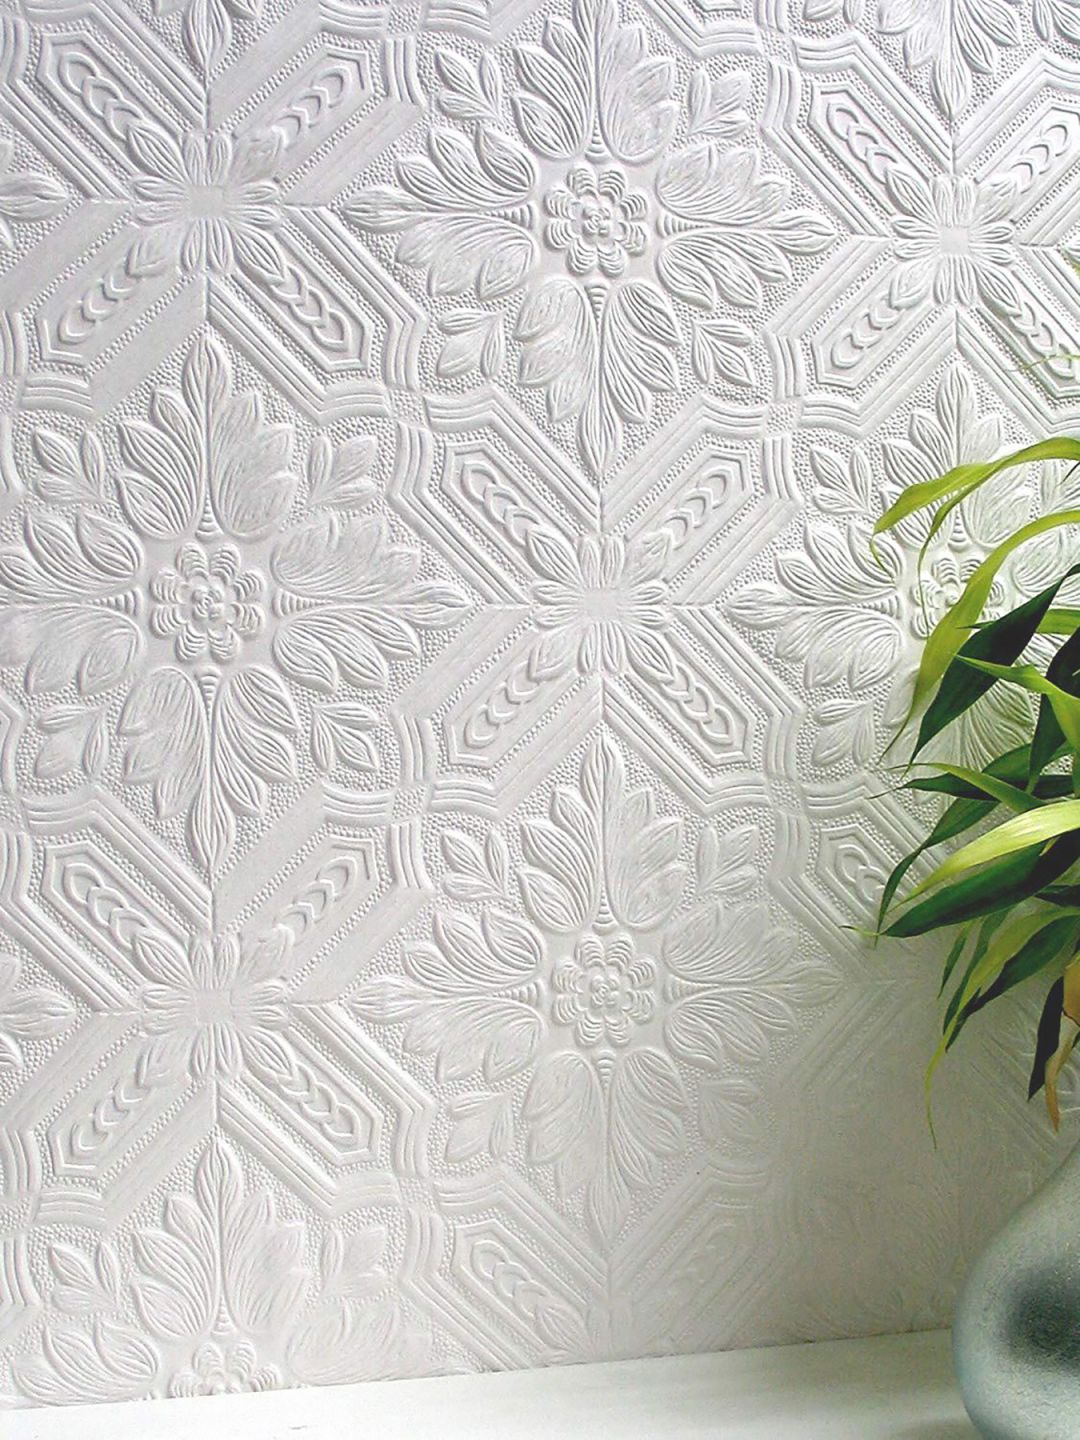 A white wallpaper with a classic pattern and relief surface, suitable for painting over